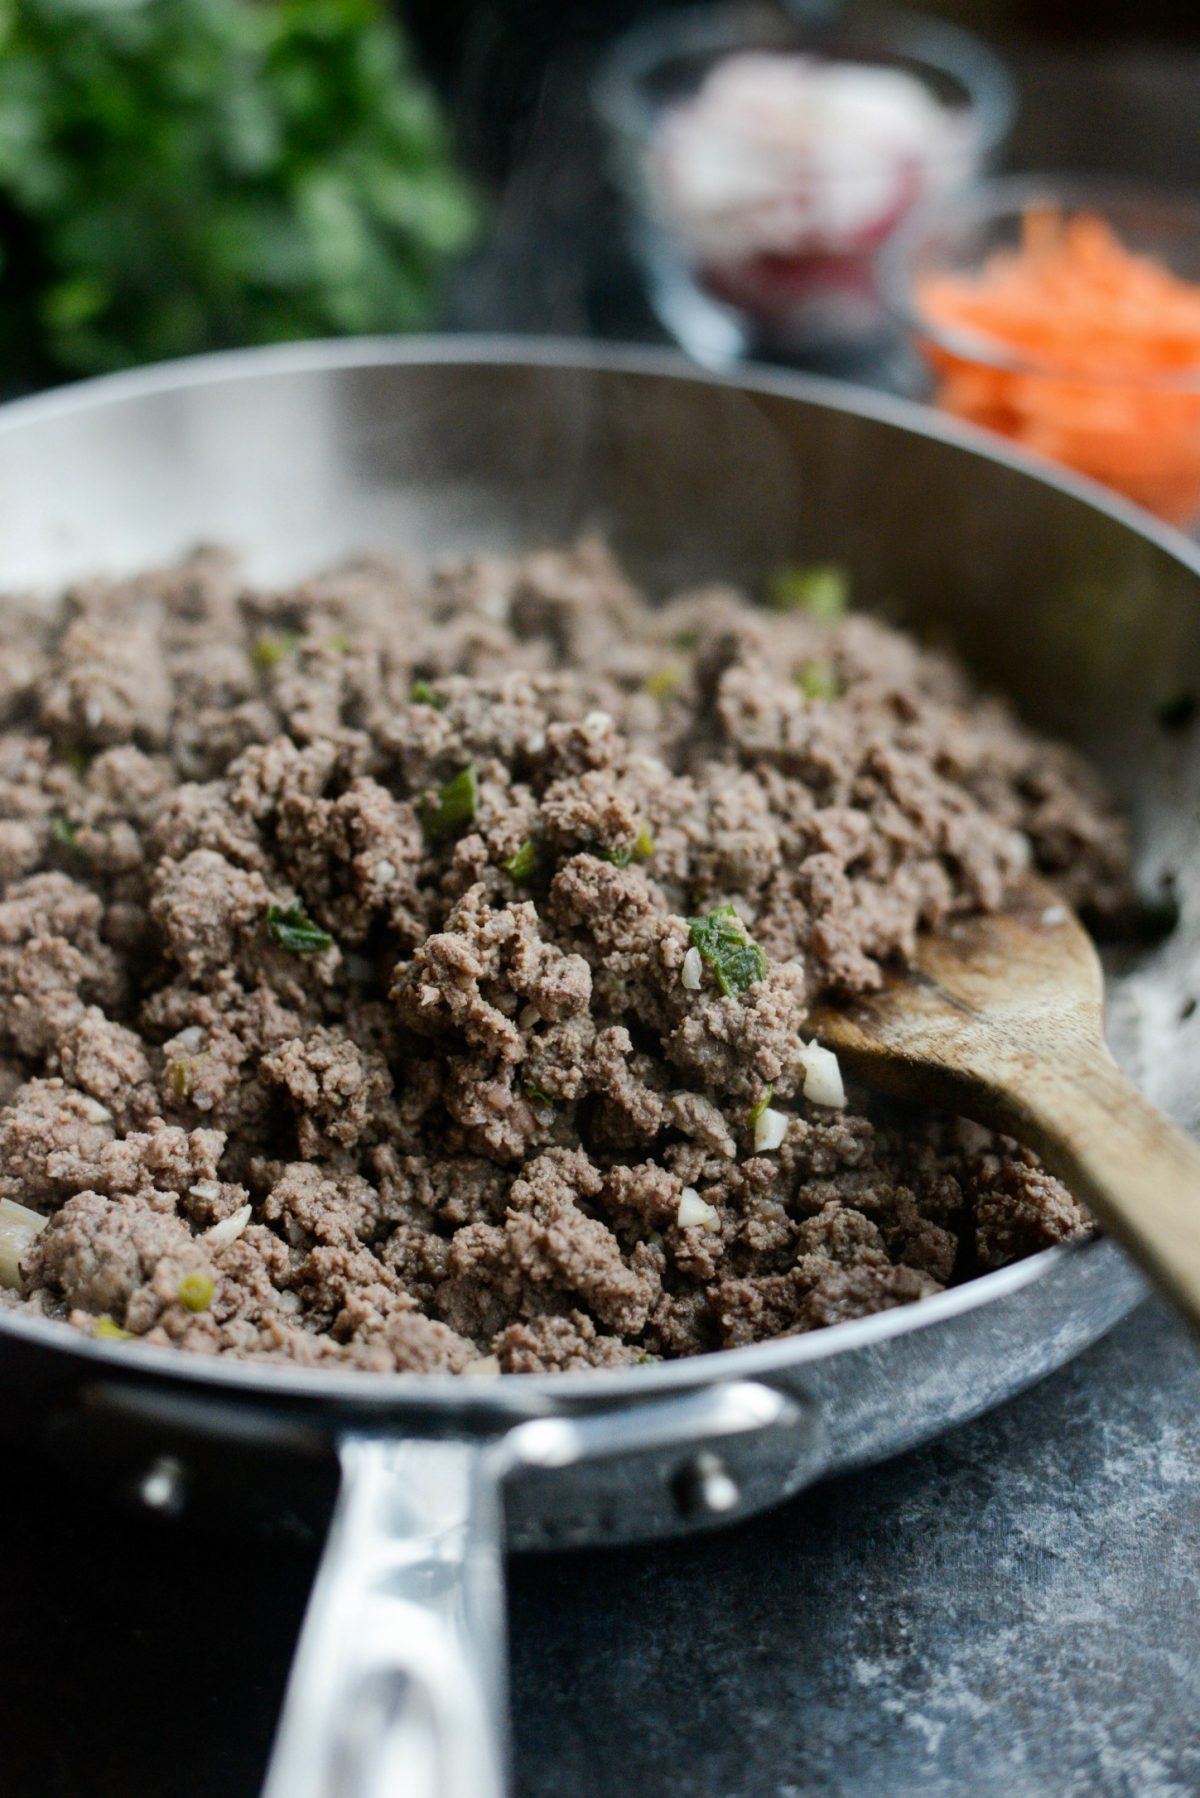 add ground beef and fully cook. Drain fat.